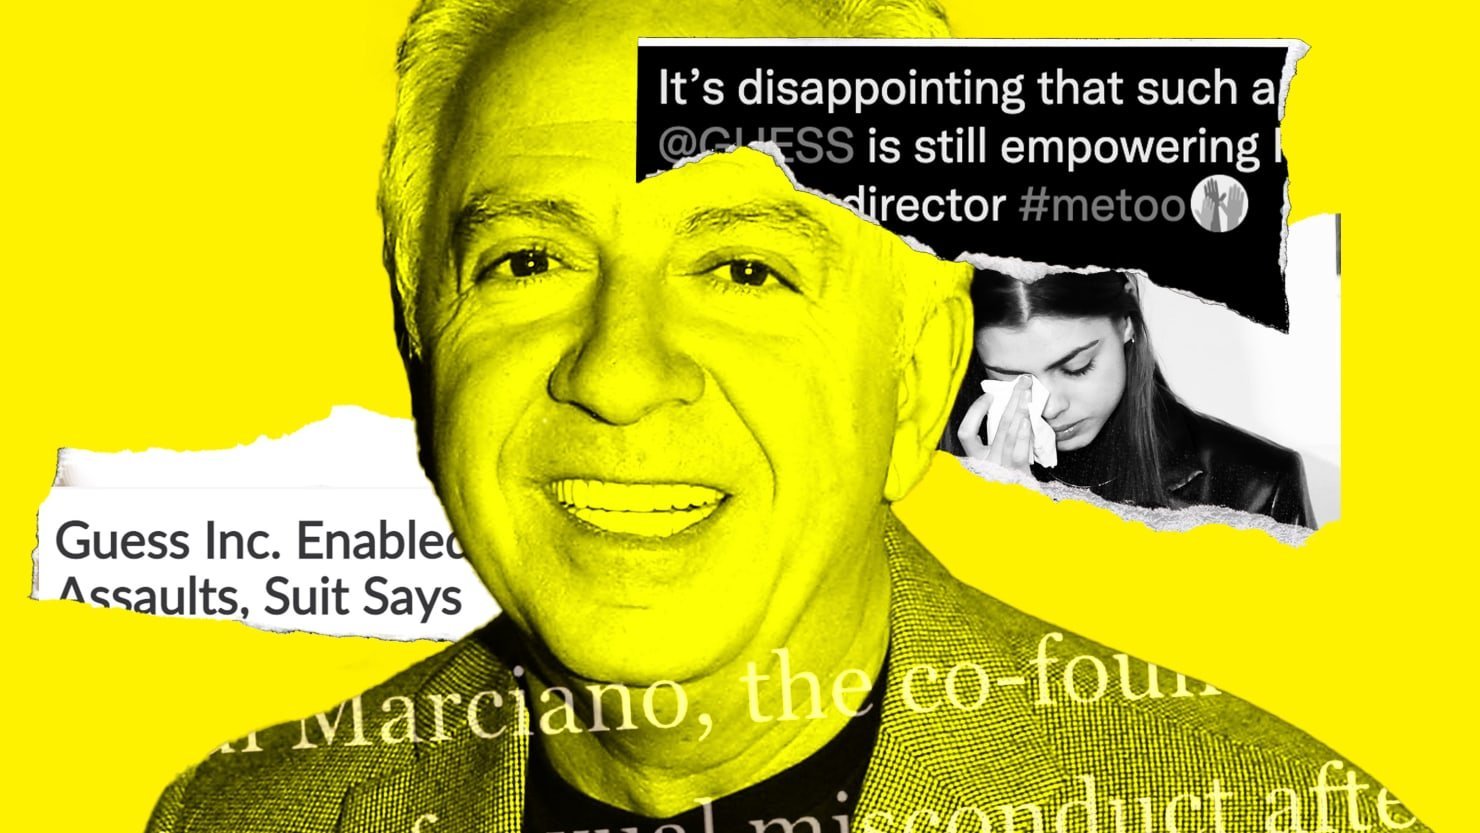 Will Guess Inc. Finally Be Shamed Into Dumping Sleazy Co-Founder Paul Marciano?